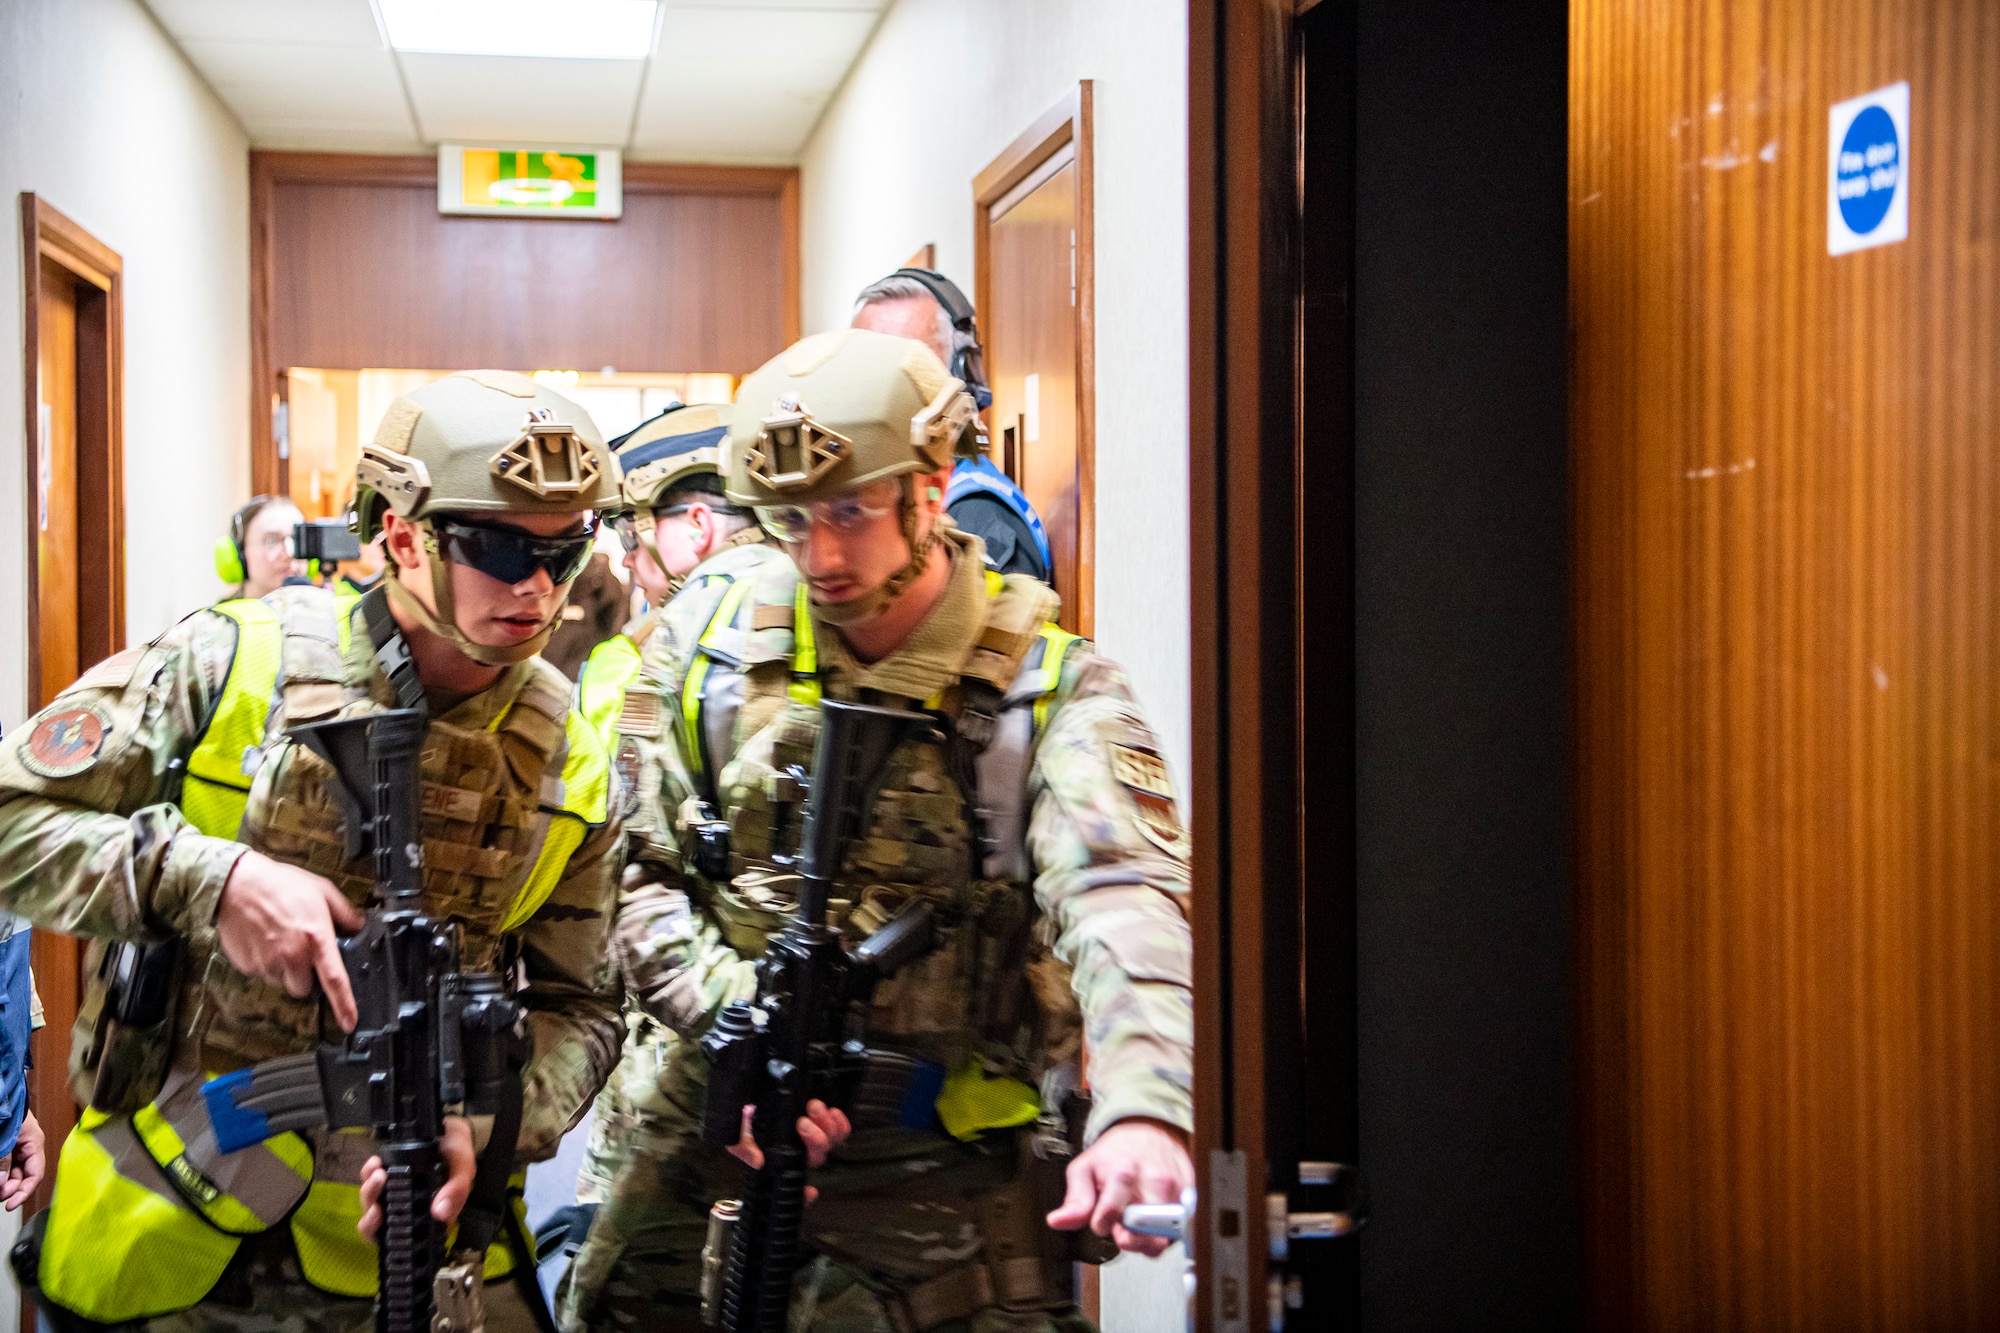 Airmen from the 422nd Security Forces Squadron, prepare to clear a room as part of a tri-agency active shooter response exercise at RAF Croughton, England, June 30, 2021. Airmen from the 422nd SFS along with police officers from the Northamptonshire Police Department and Ministry of Defense, participated in multiple exercises to enhance their search and seizure tactics, strengthen local ties and gain rapport with their fellow officers. (U.S. Air Force photo by Senior Airman Eugene Oliver)